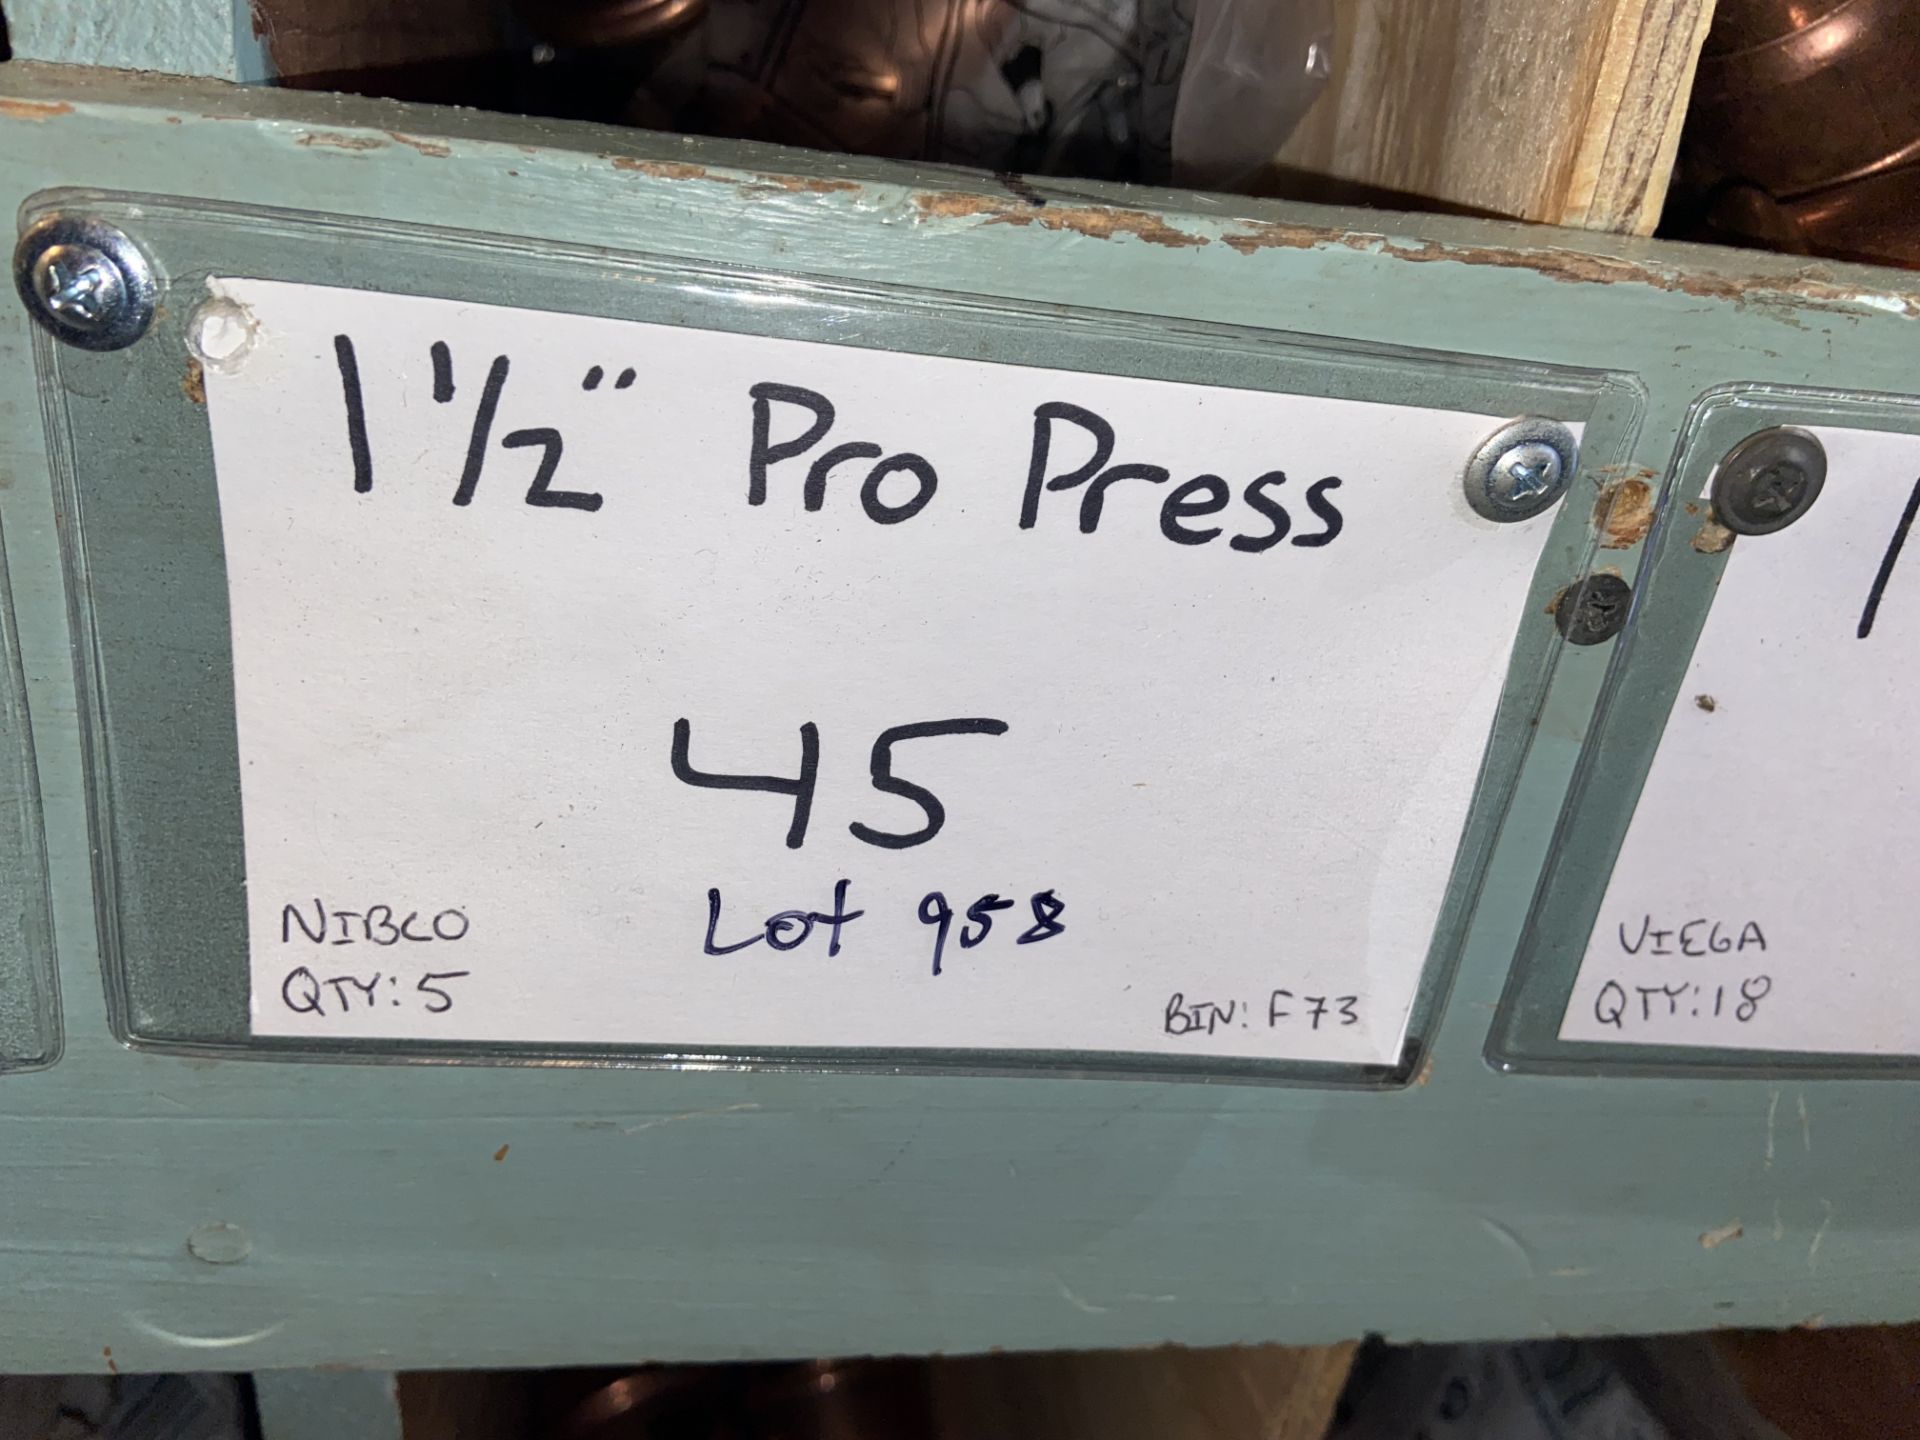 VIEGA (19) 1 1/4” pro press stop coupling CELLO (1) (LOCATED IN MONROEVILLE, PA) - Image 4 of 4